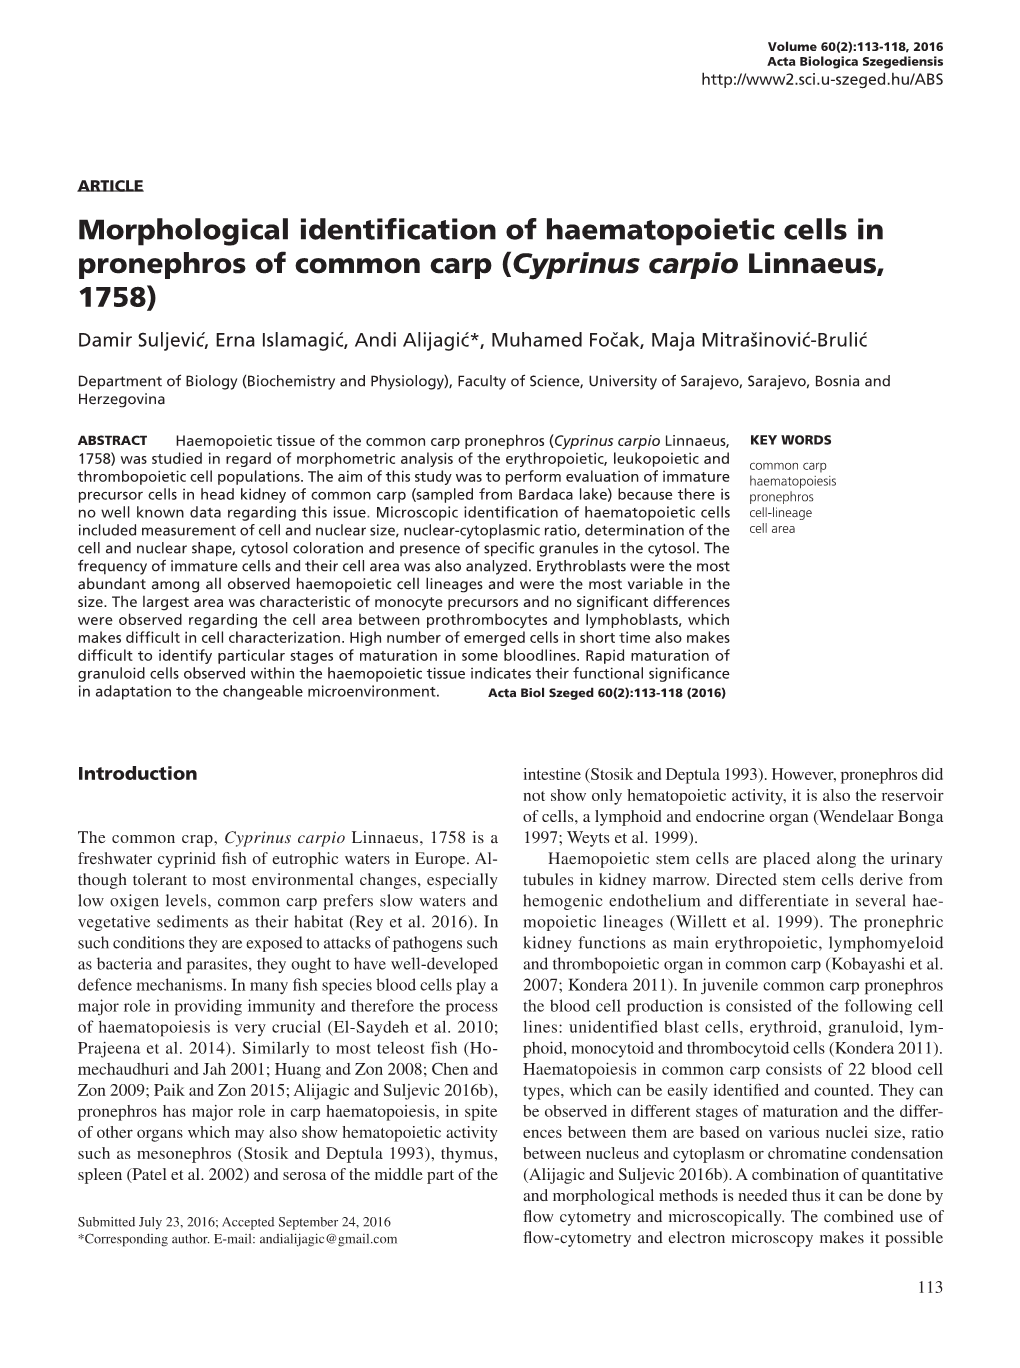 Morphological Identification of Haematopoietic Cells in Pronephros